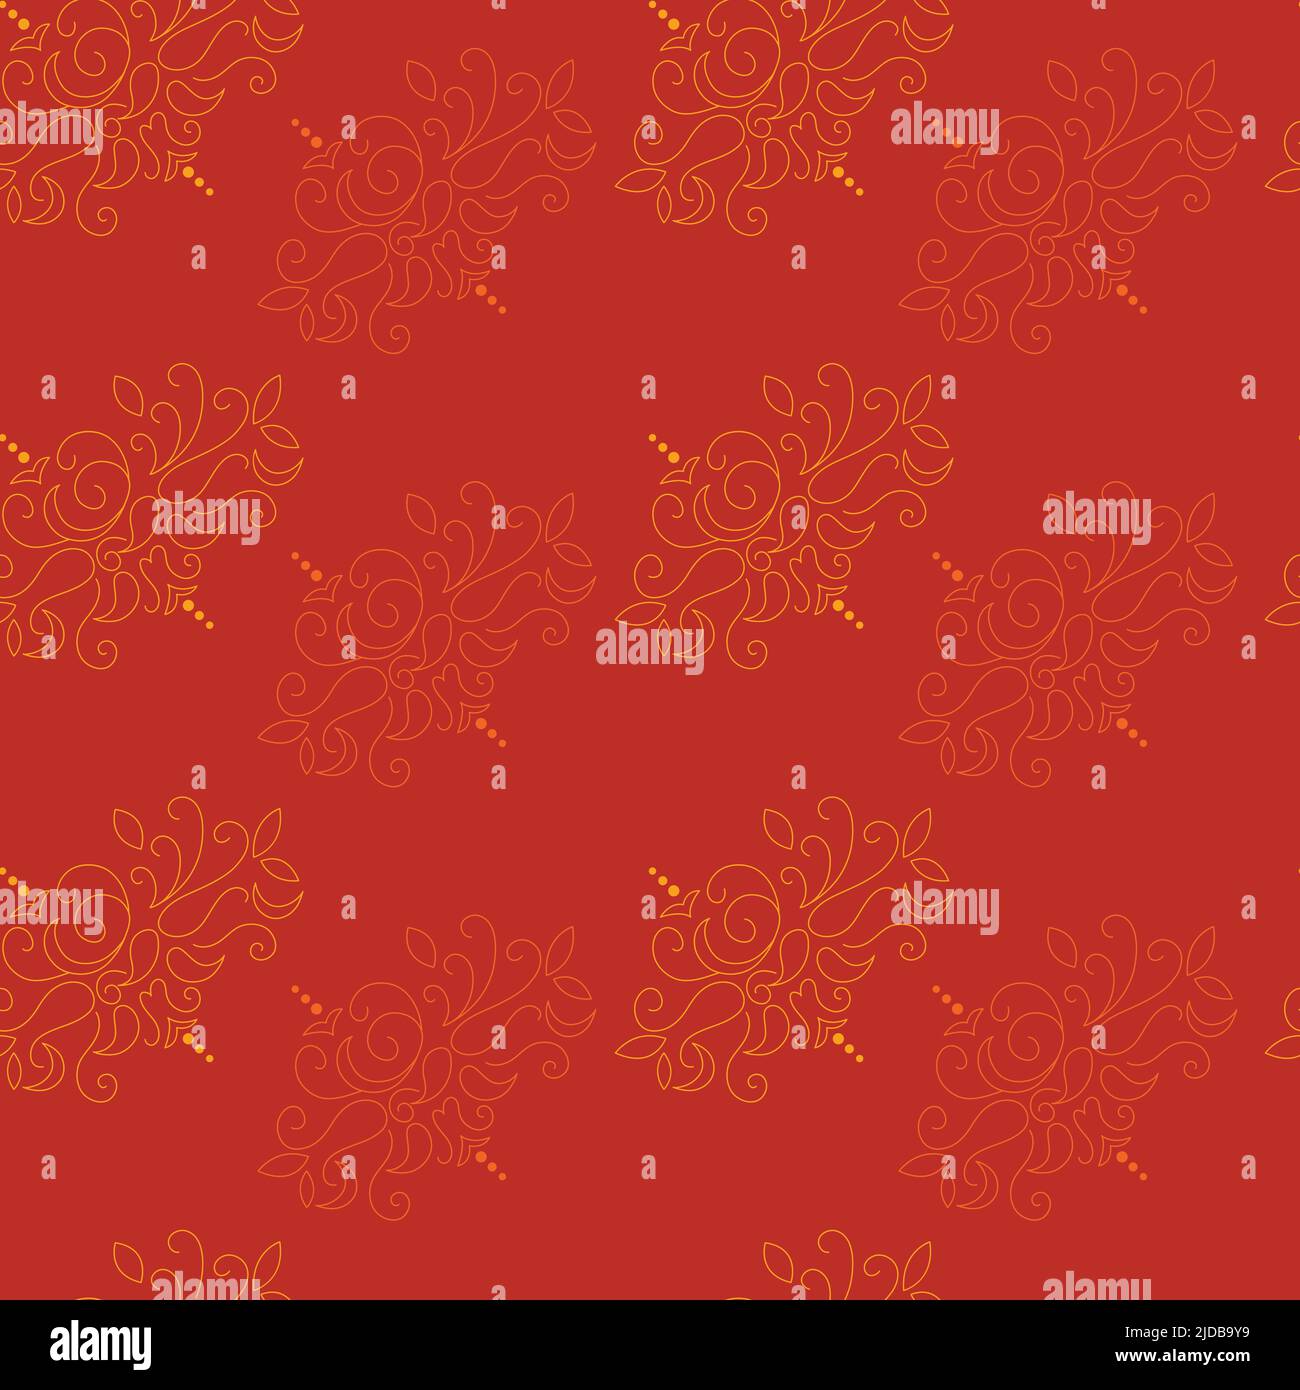 Dark orange motifs vector repeat pattern for textile, fabric, paper, backgrounds, scrapbooking, packaging projects Stock Vector